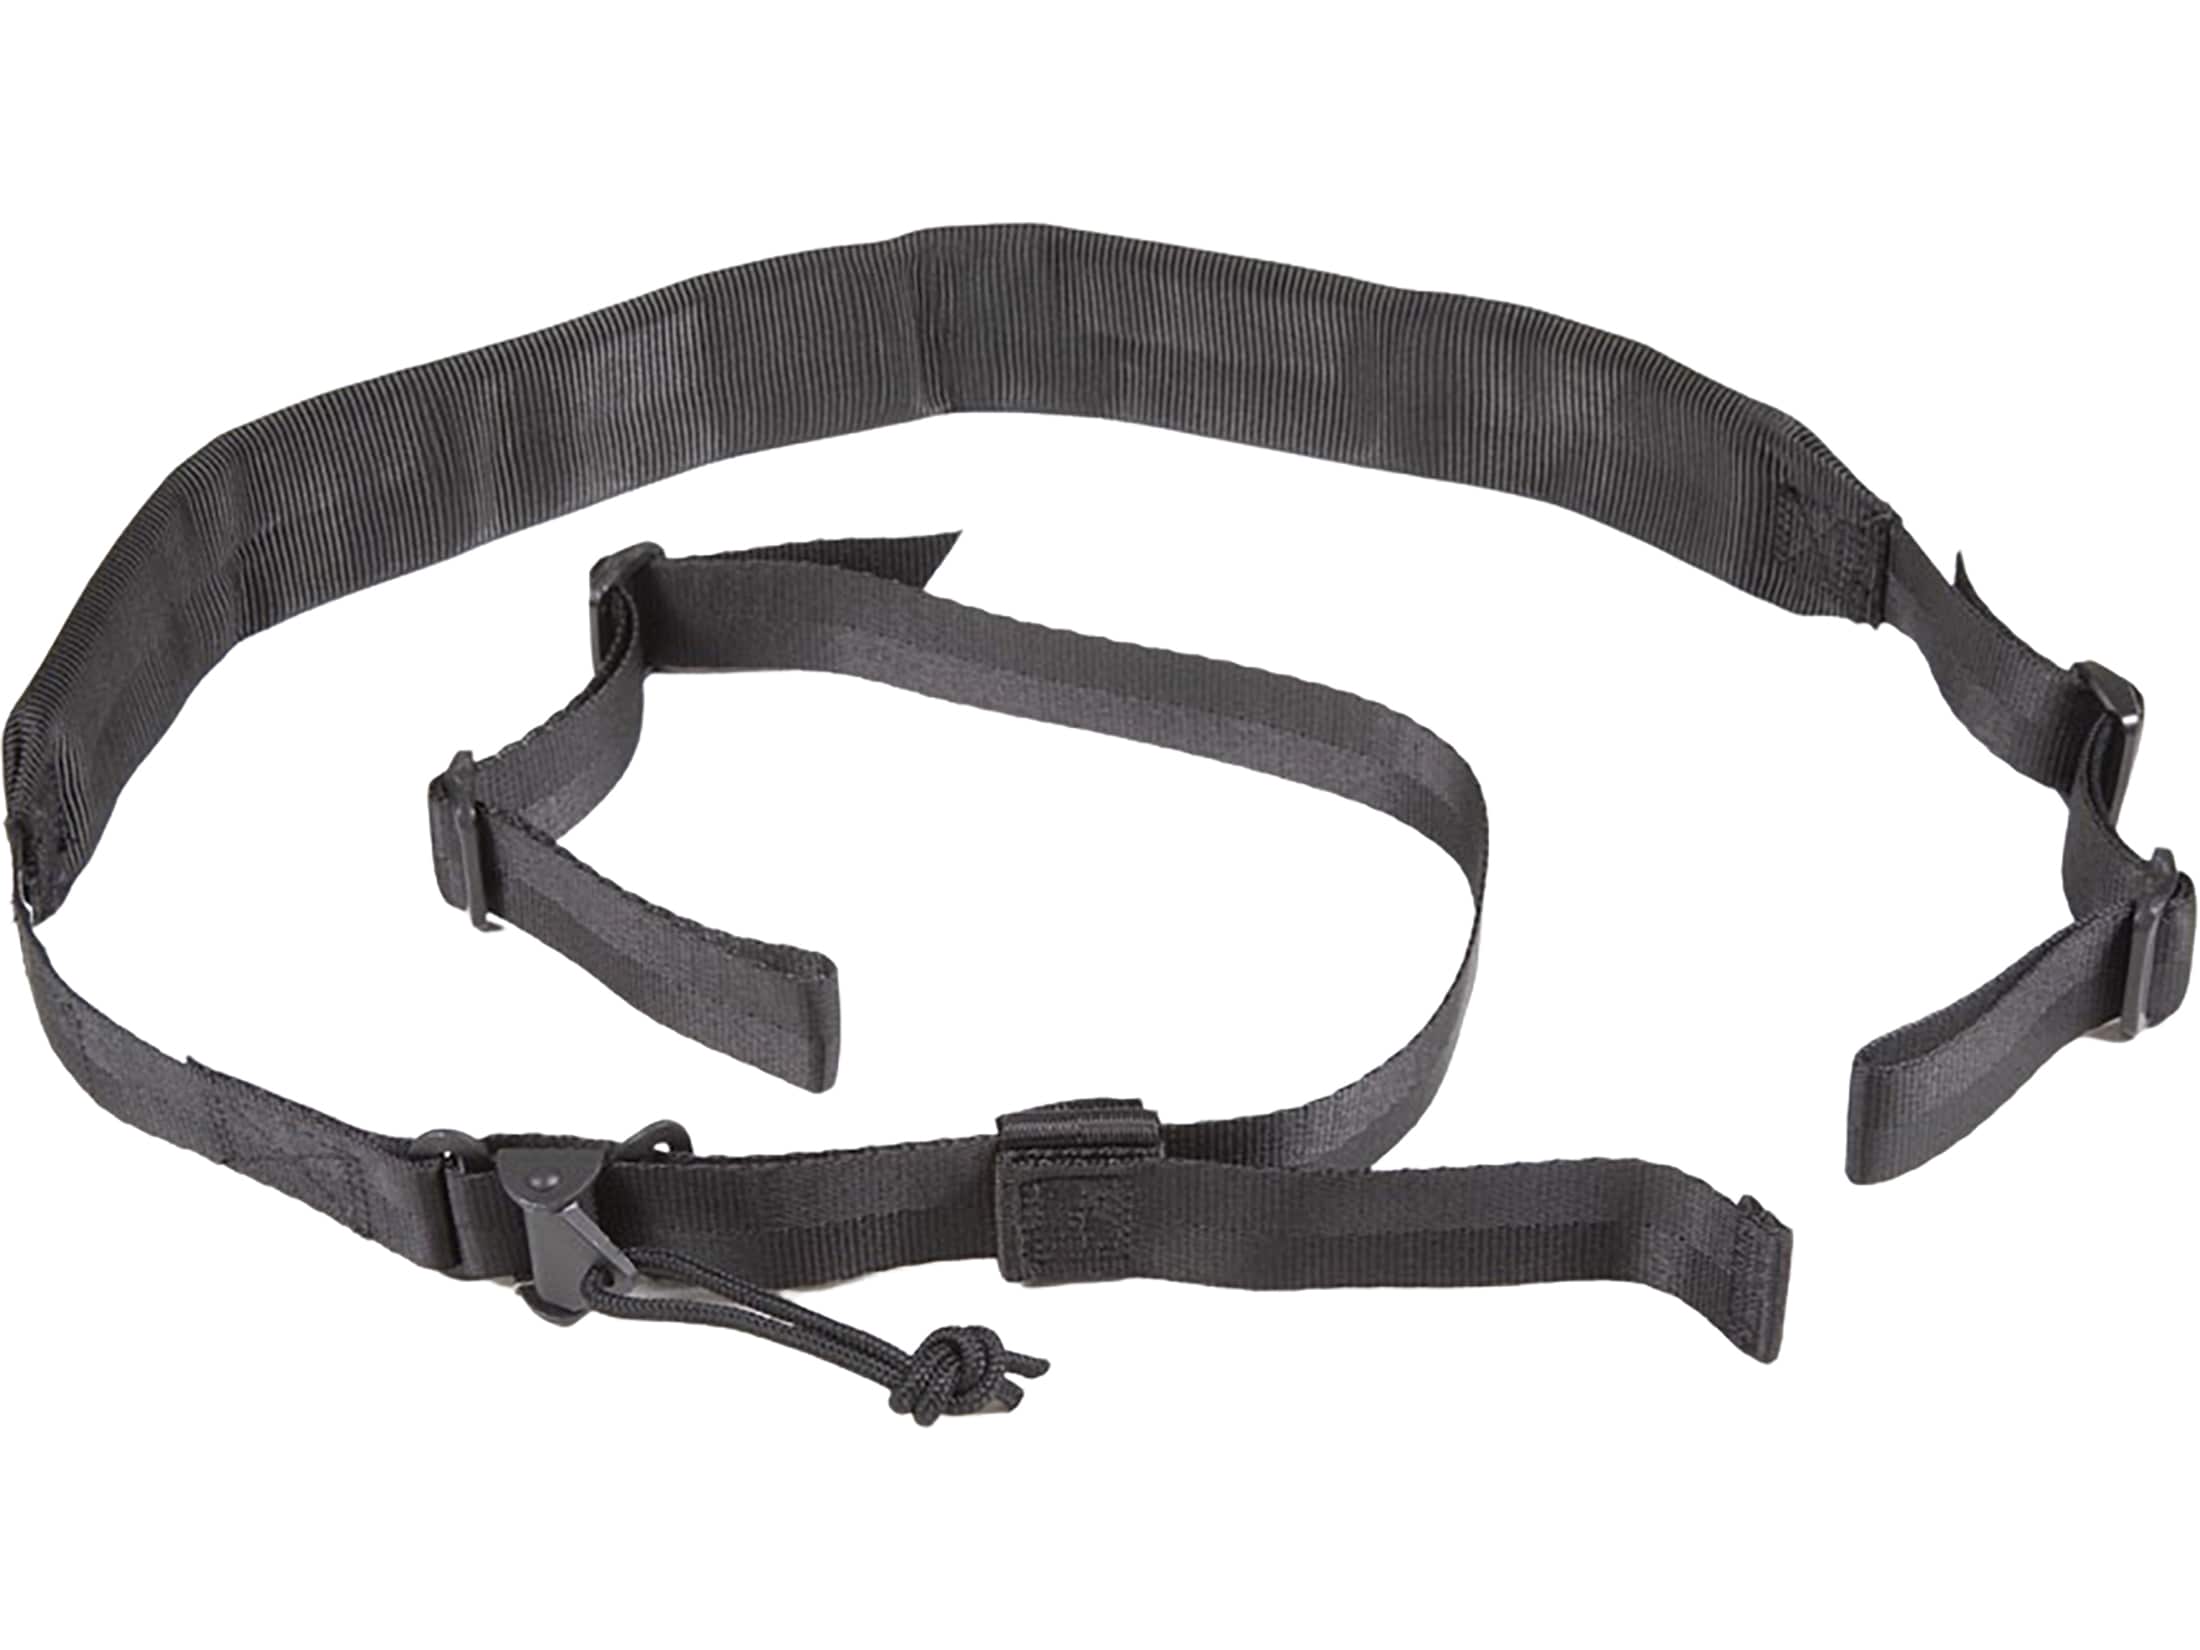 VTAC Padded Two Point Rifle Sling Nylon Foliage Green